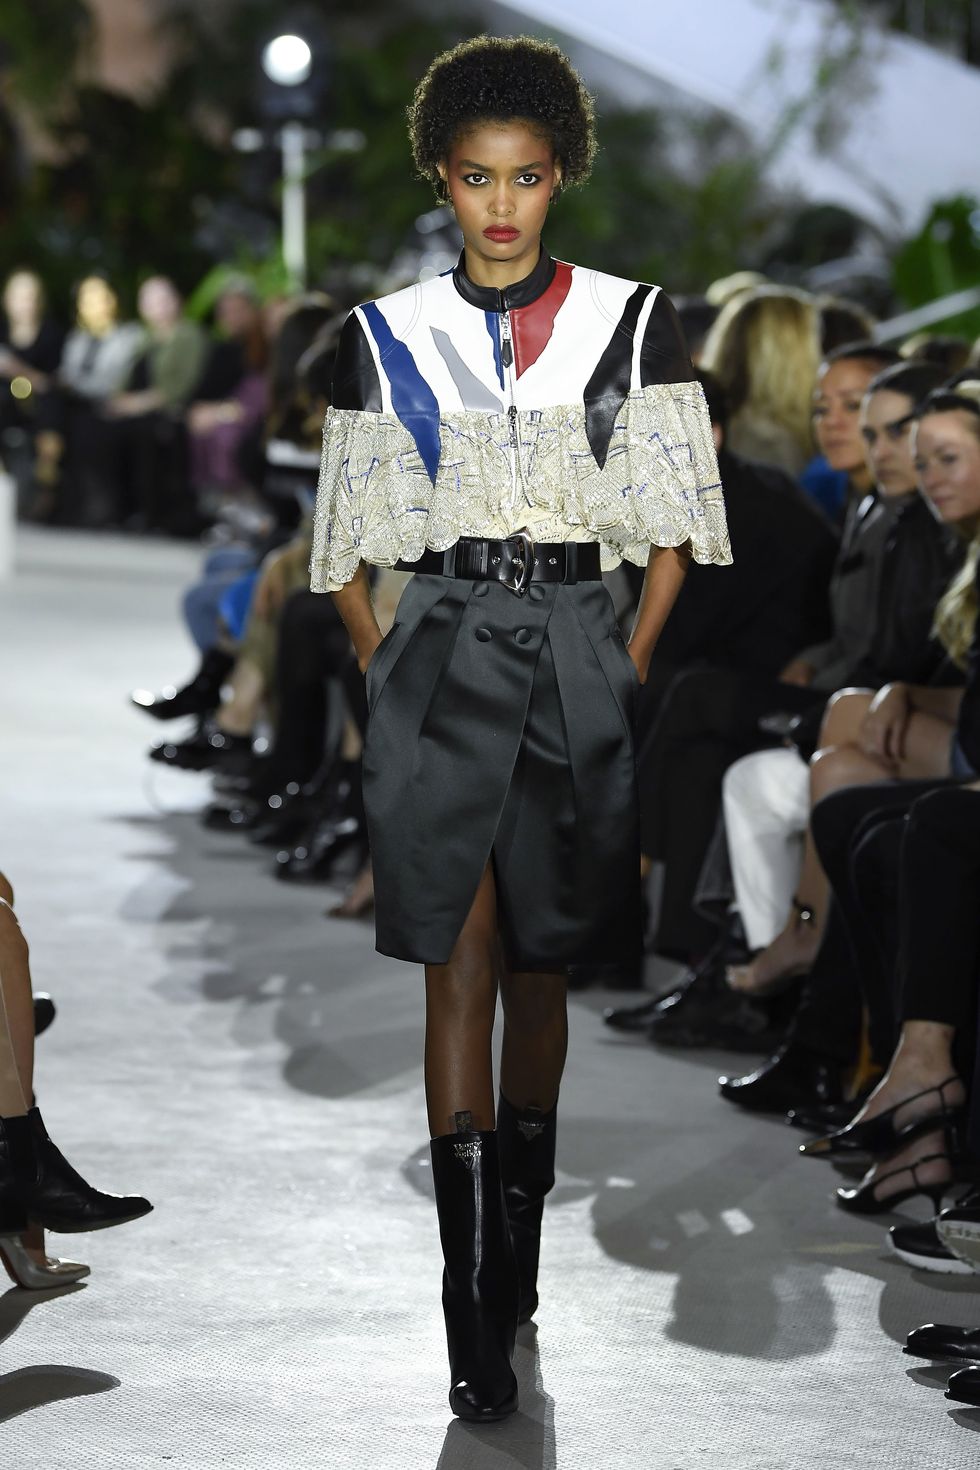 Louis Vuitton Held Its 2020 Cruise Show at JFK Airport